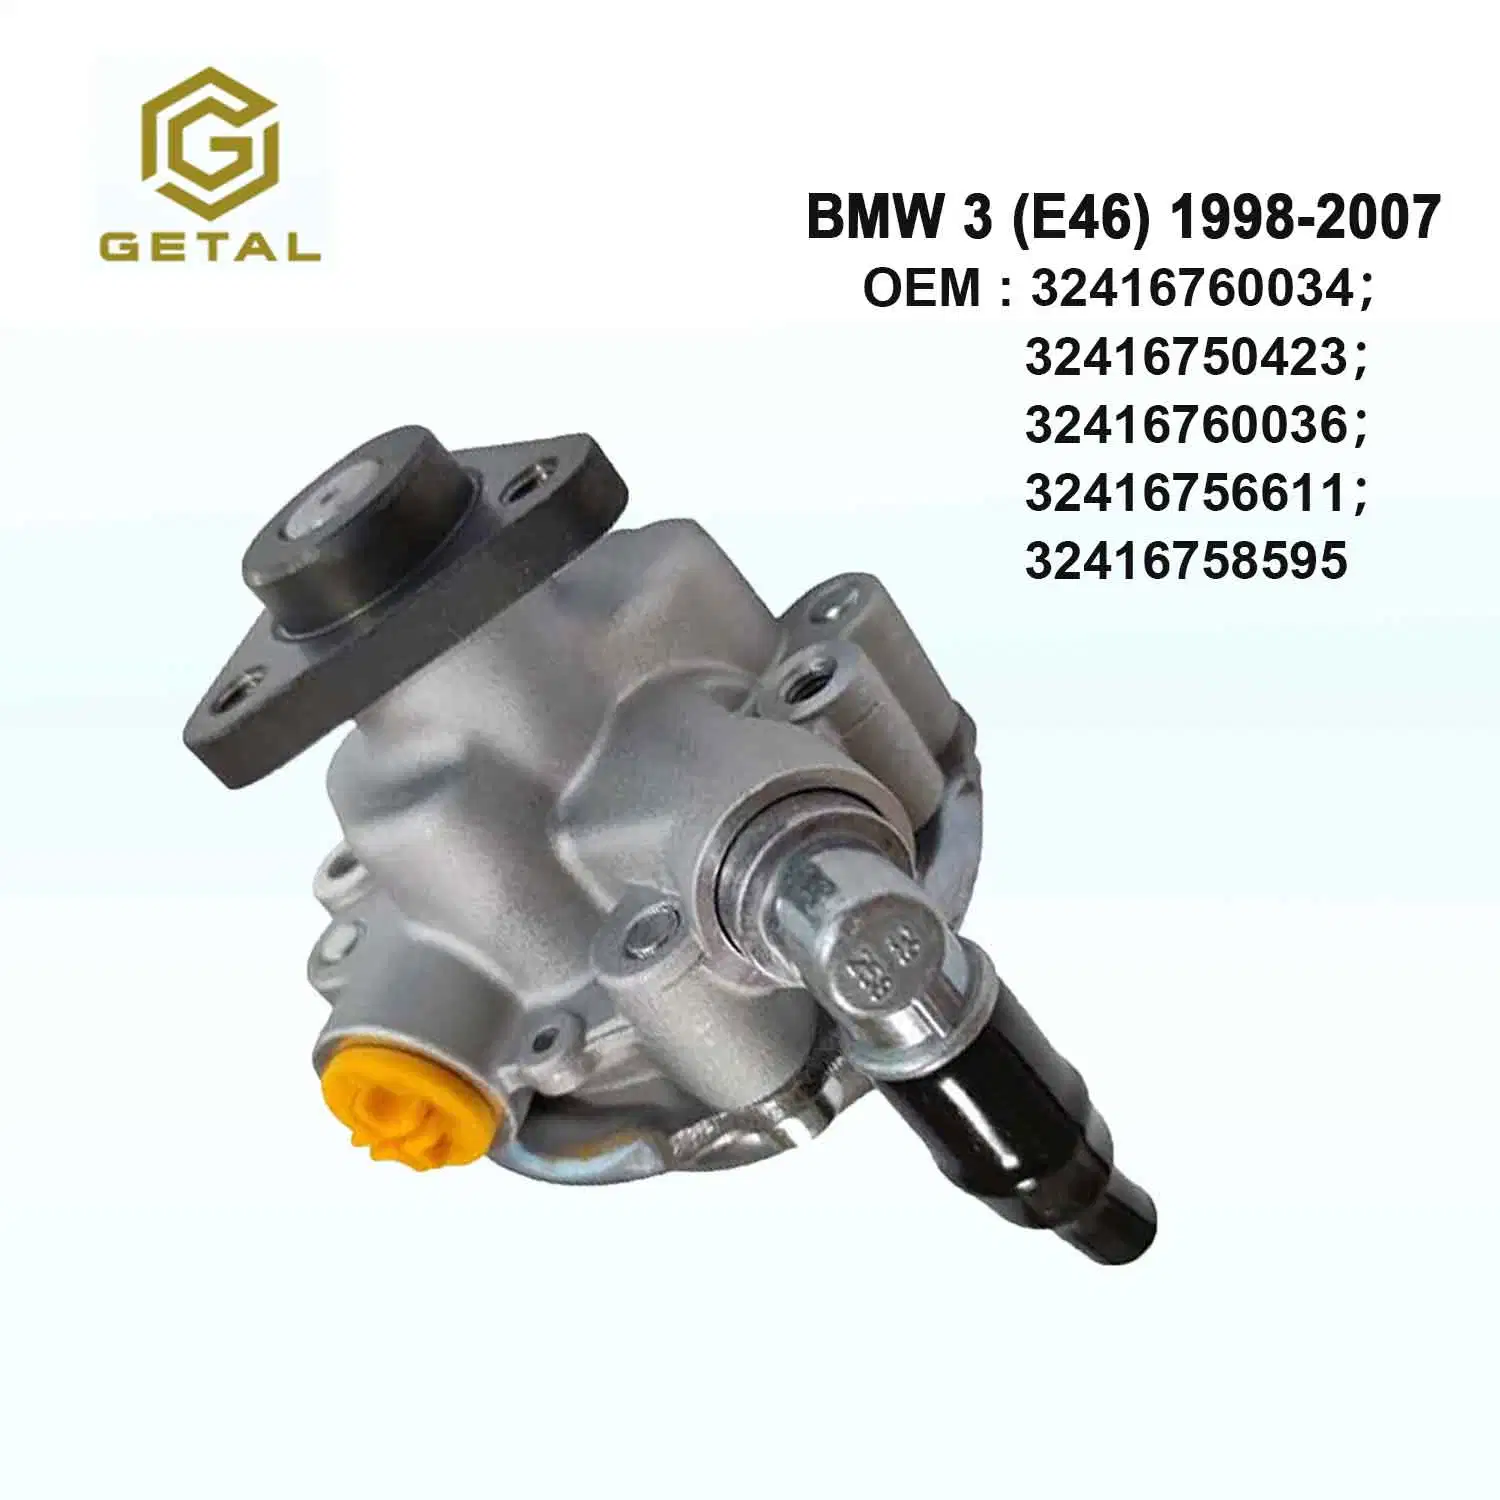 Auto Part Power Steering Pump for BMW E46 1998-2007 32416760034/32416750423/32416760036 /32416756611/32416758595